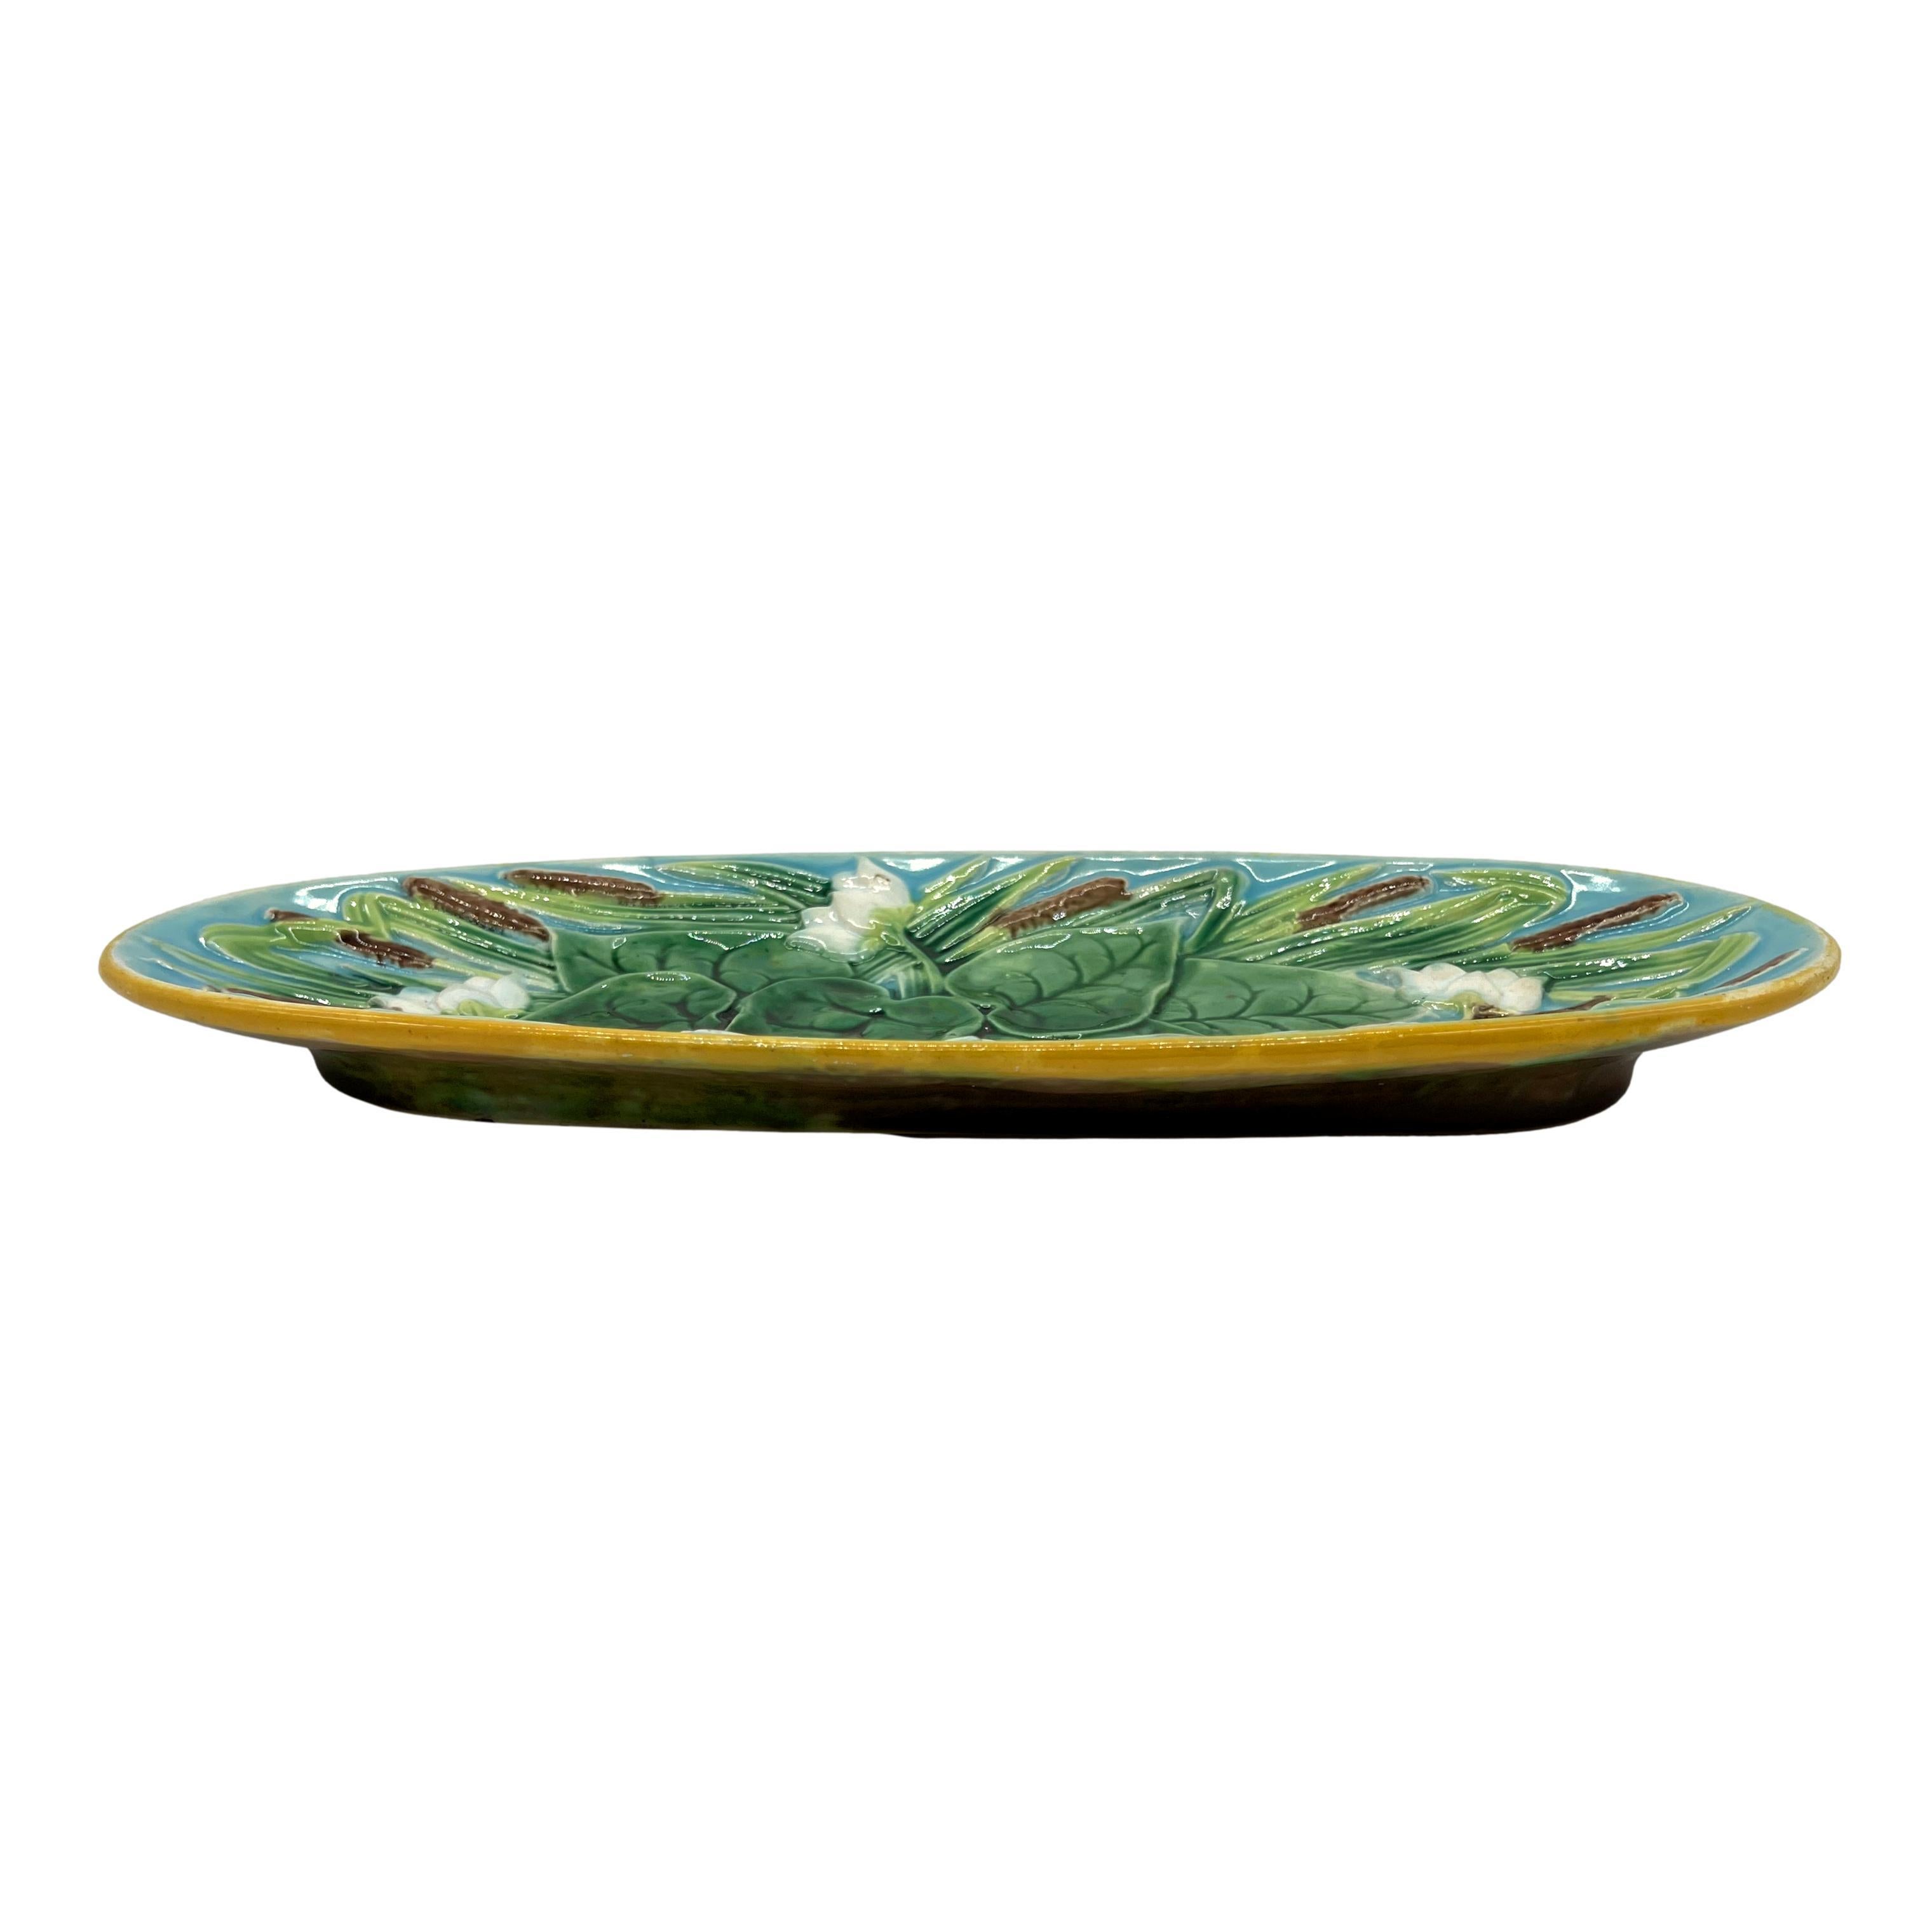 George Jones Majolica Pond Lilies and Bullrushes 10-in Tray, English, c. 1875 For Sale 1